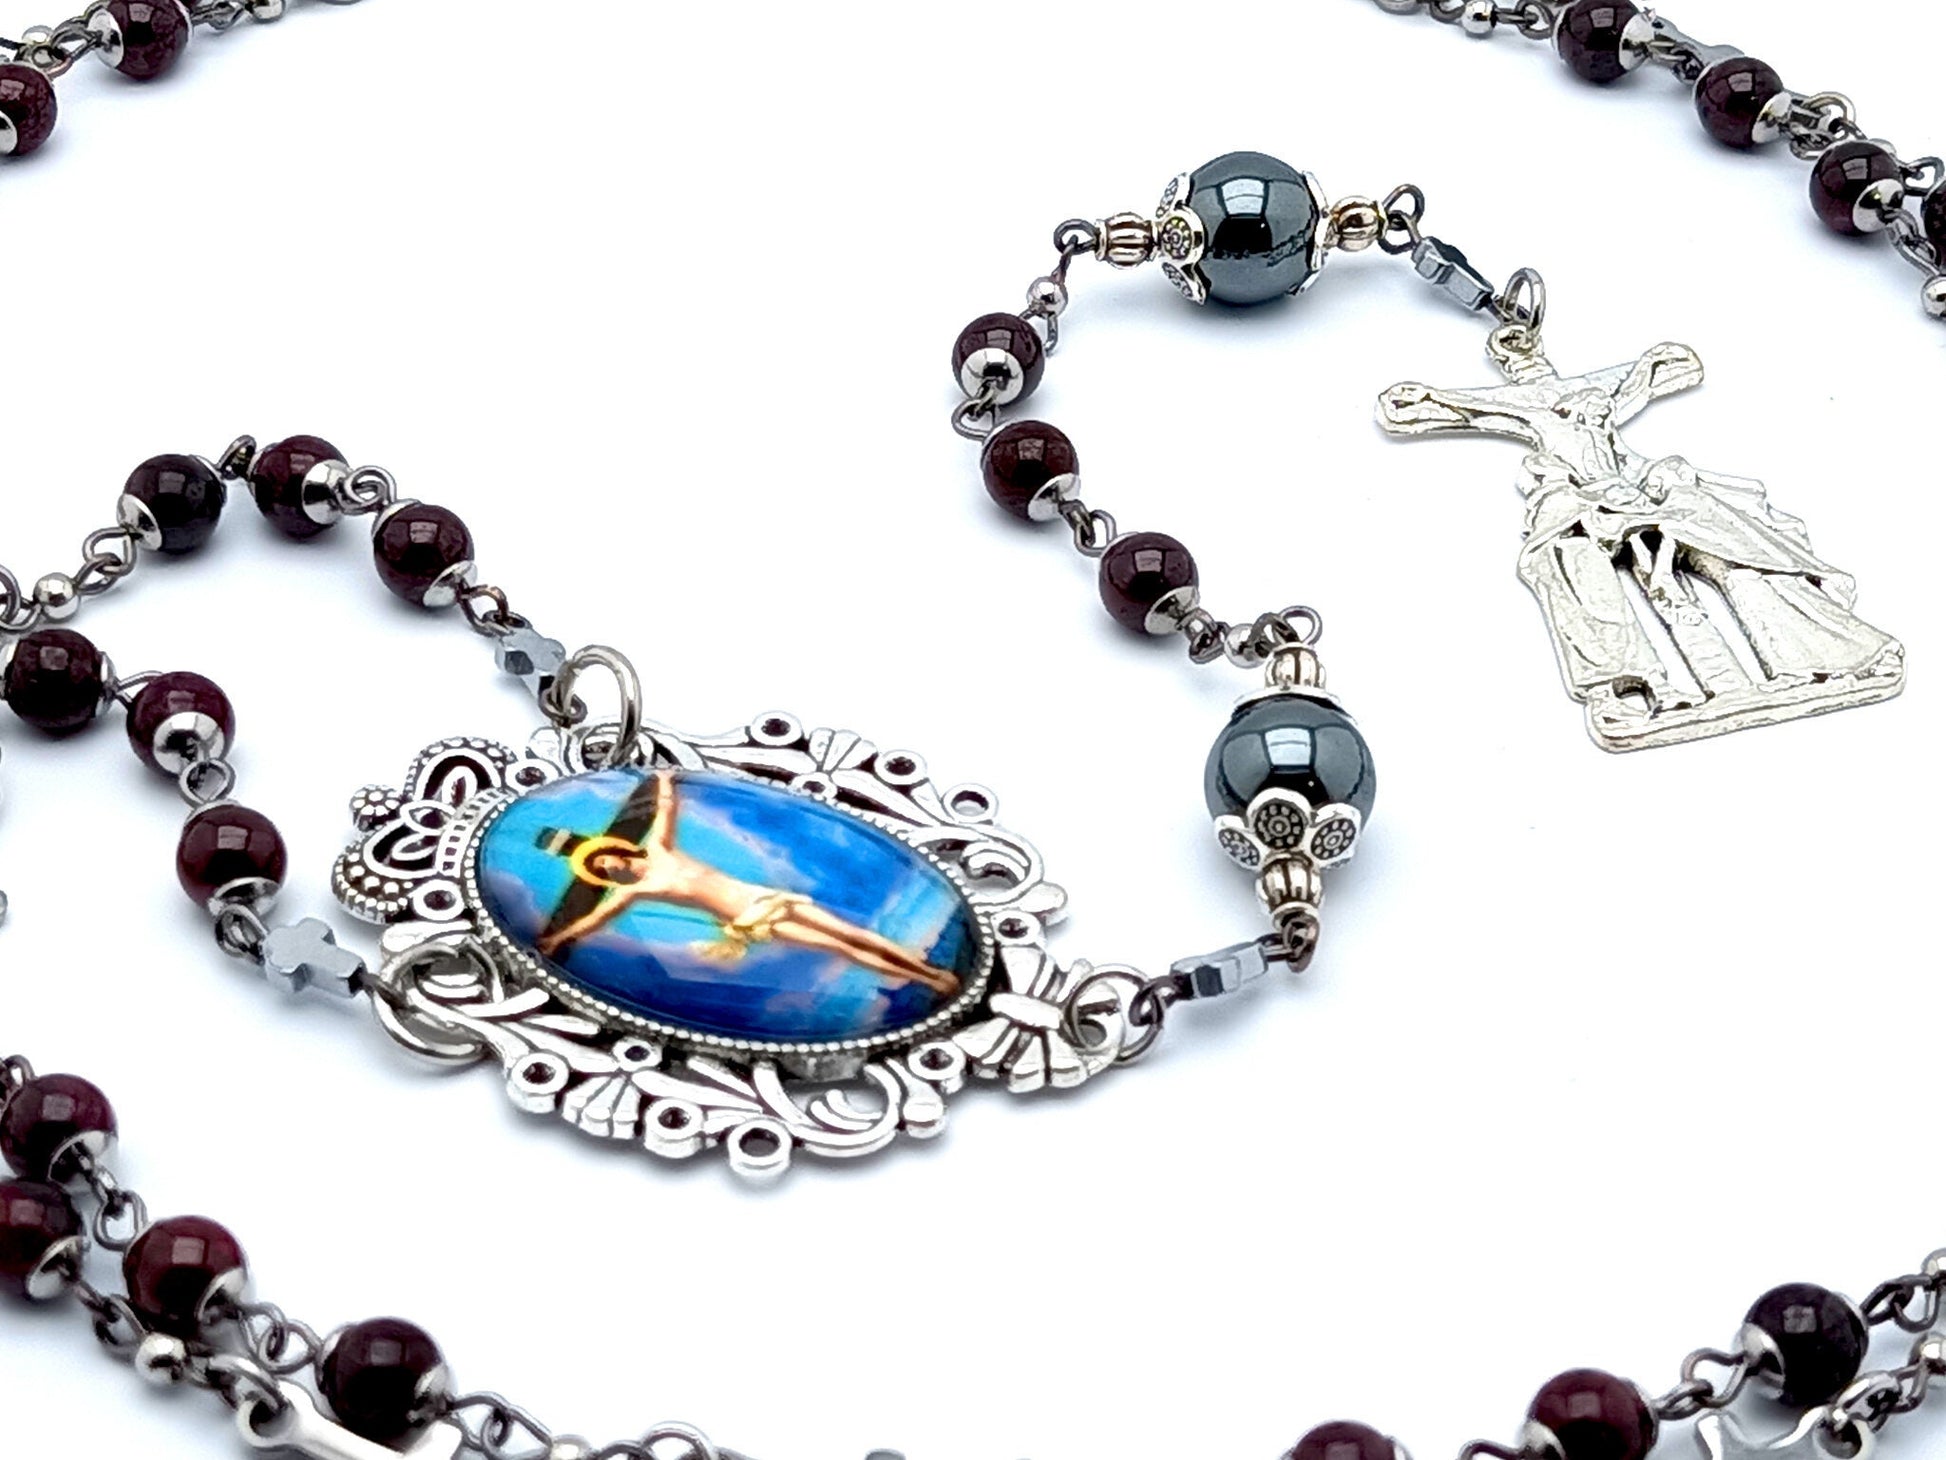 Stations of the Cross unique rosary beads garnet gemstone prayer chaplet with Saint John and Virgin crucifix with stainless steel cross beads.